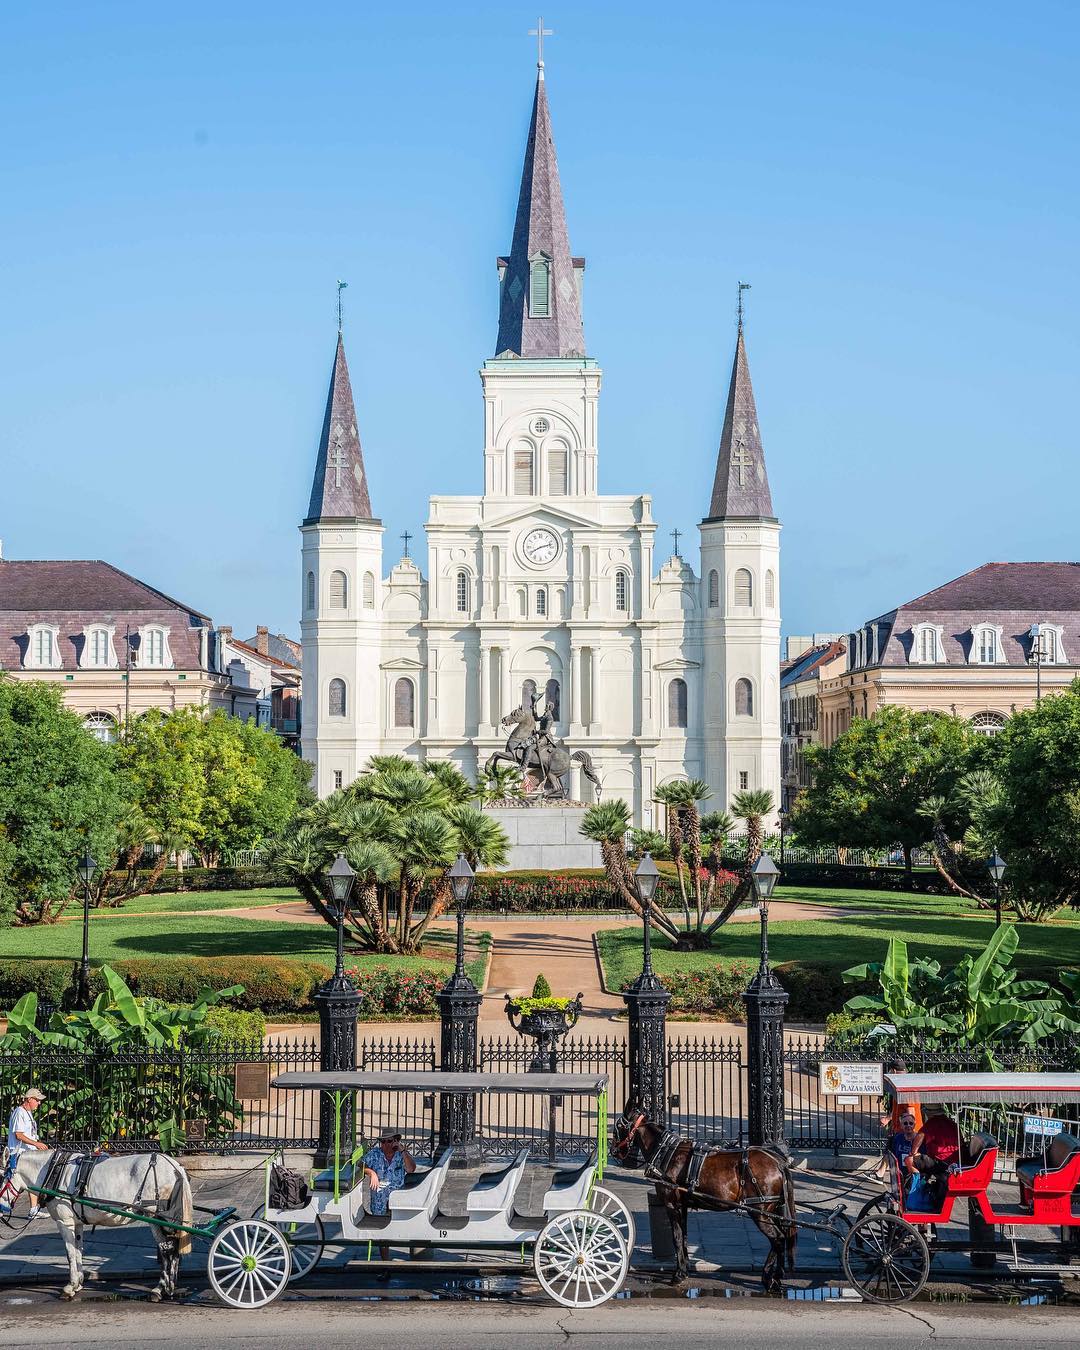 Horse-drawn carriages in front of white cathedral in New Orleans. Photo by Instagram user @gettingstamped